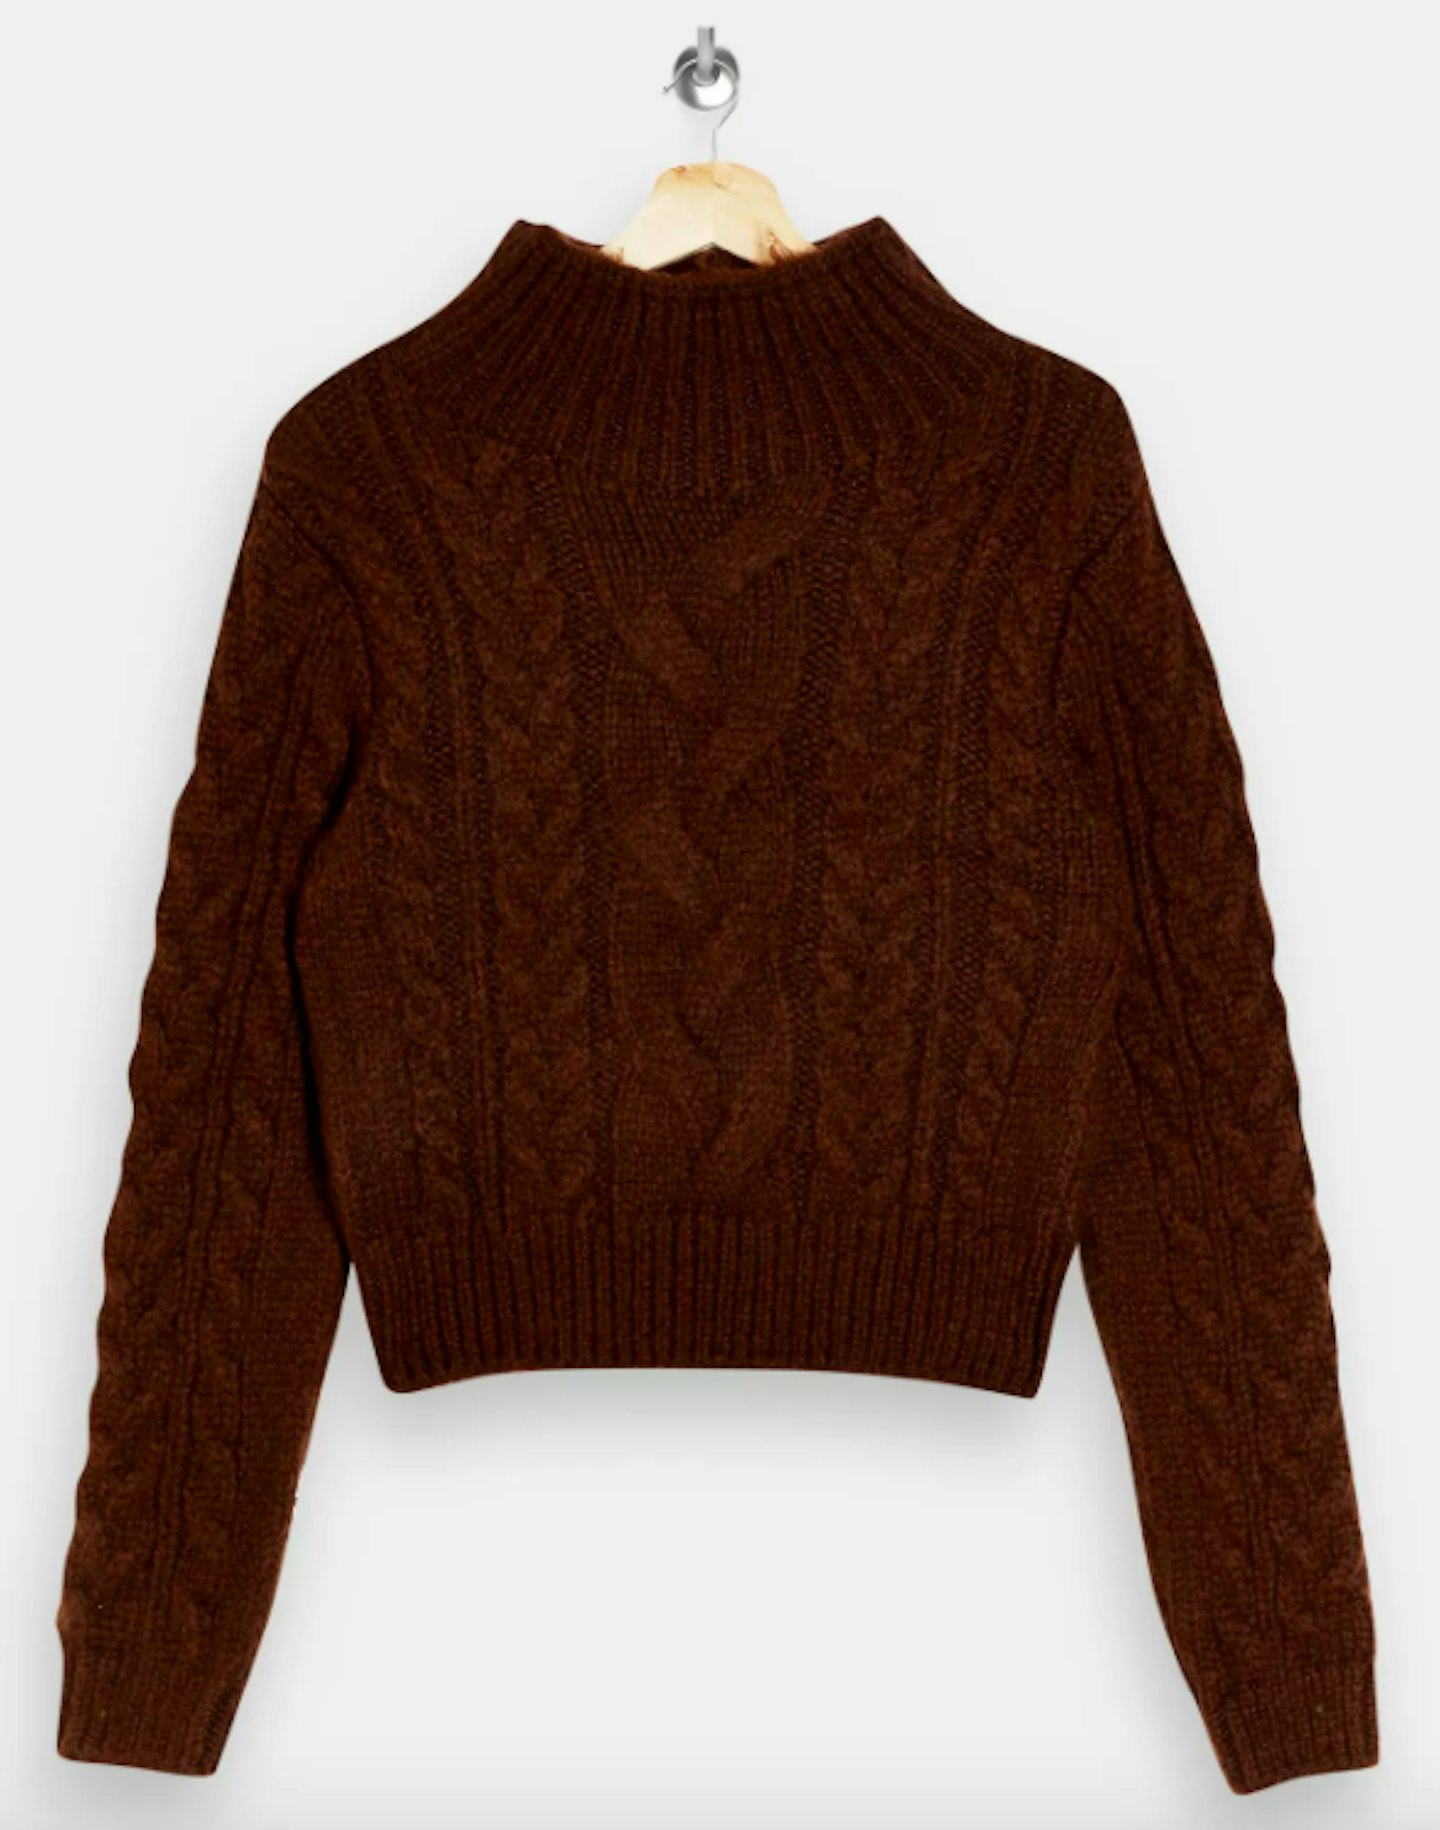 Topshop, Brown Cable Knitted Crop Roll Neck Jumper, WAS £35.99, NOW £26.99